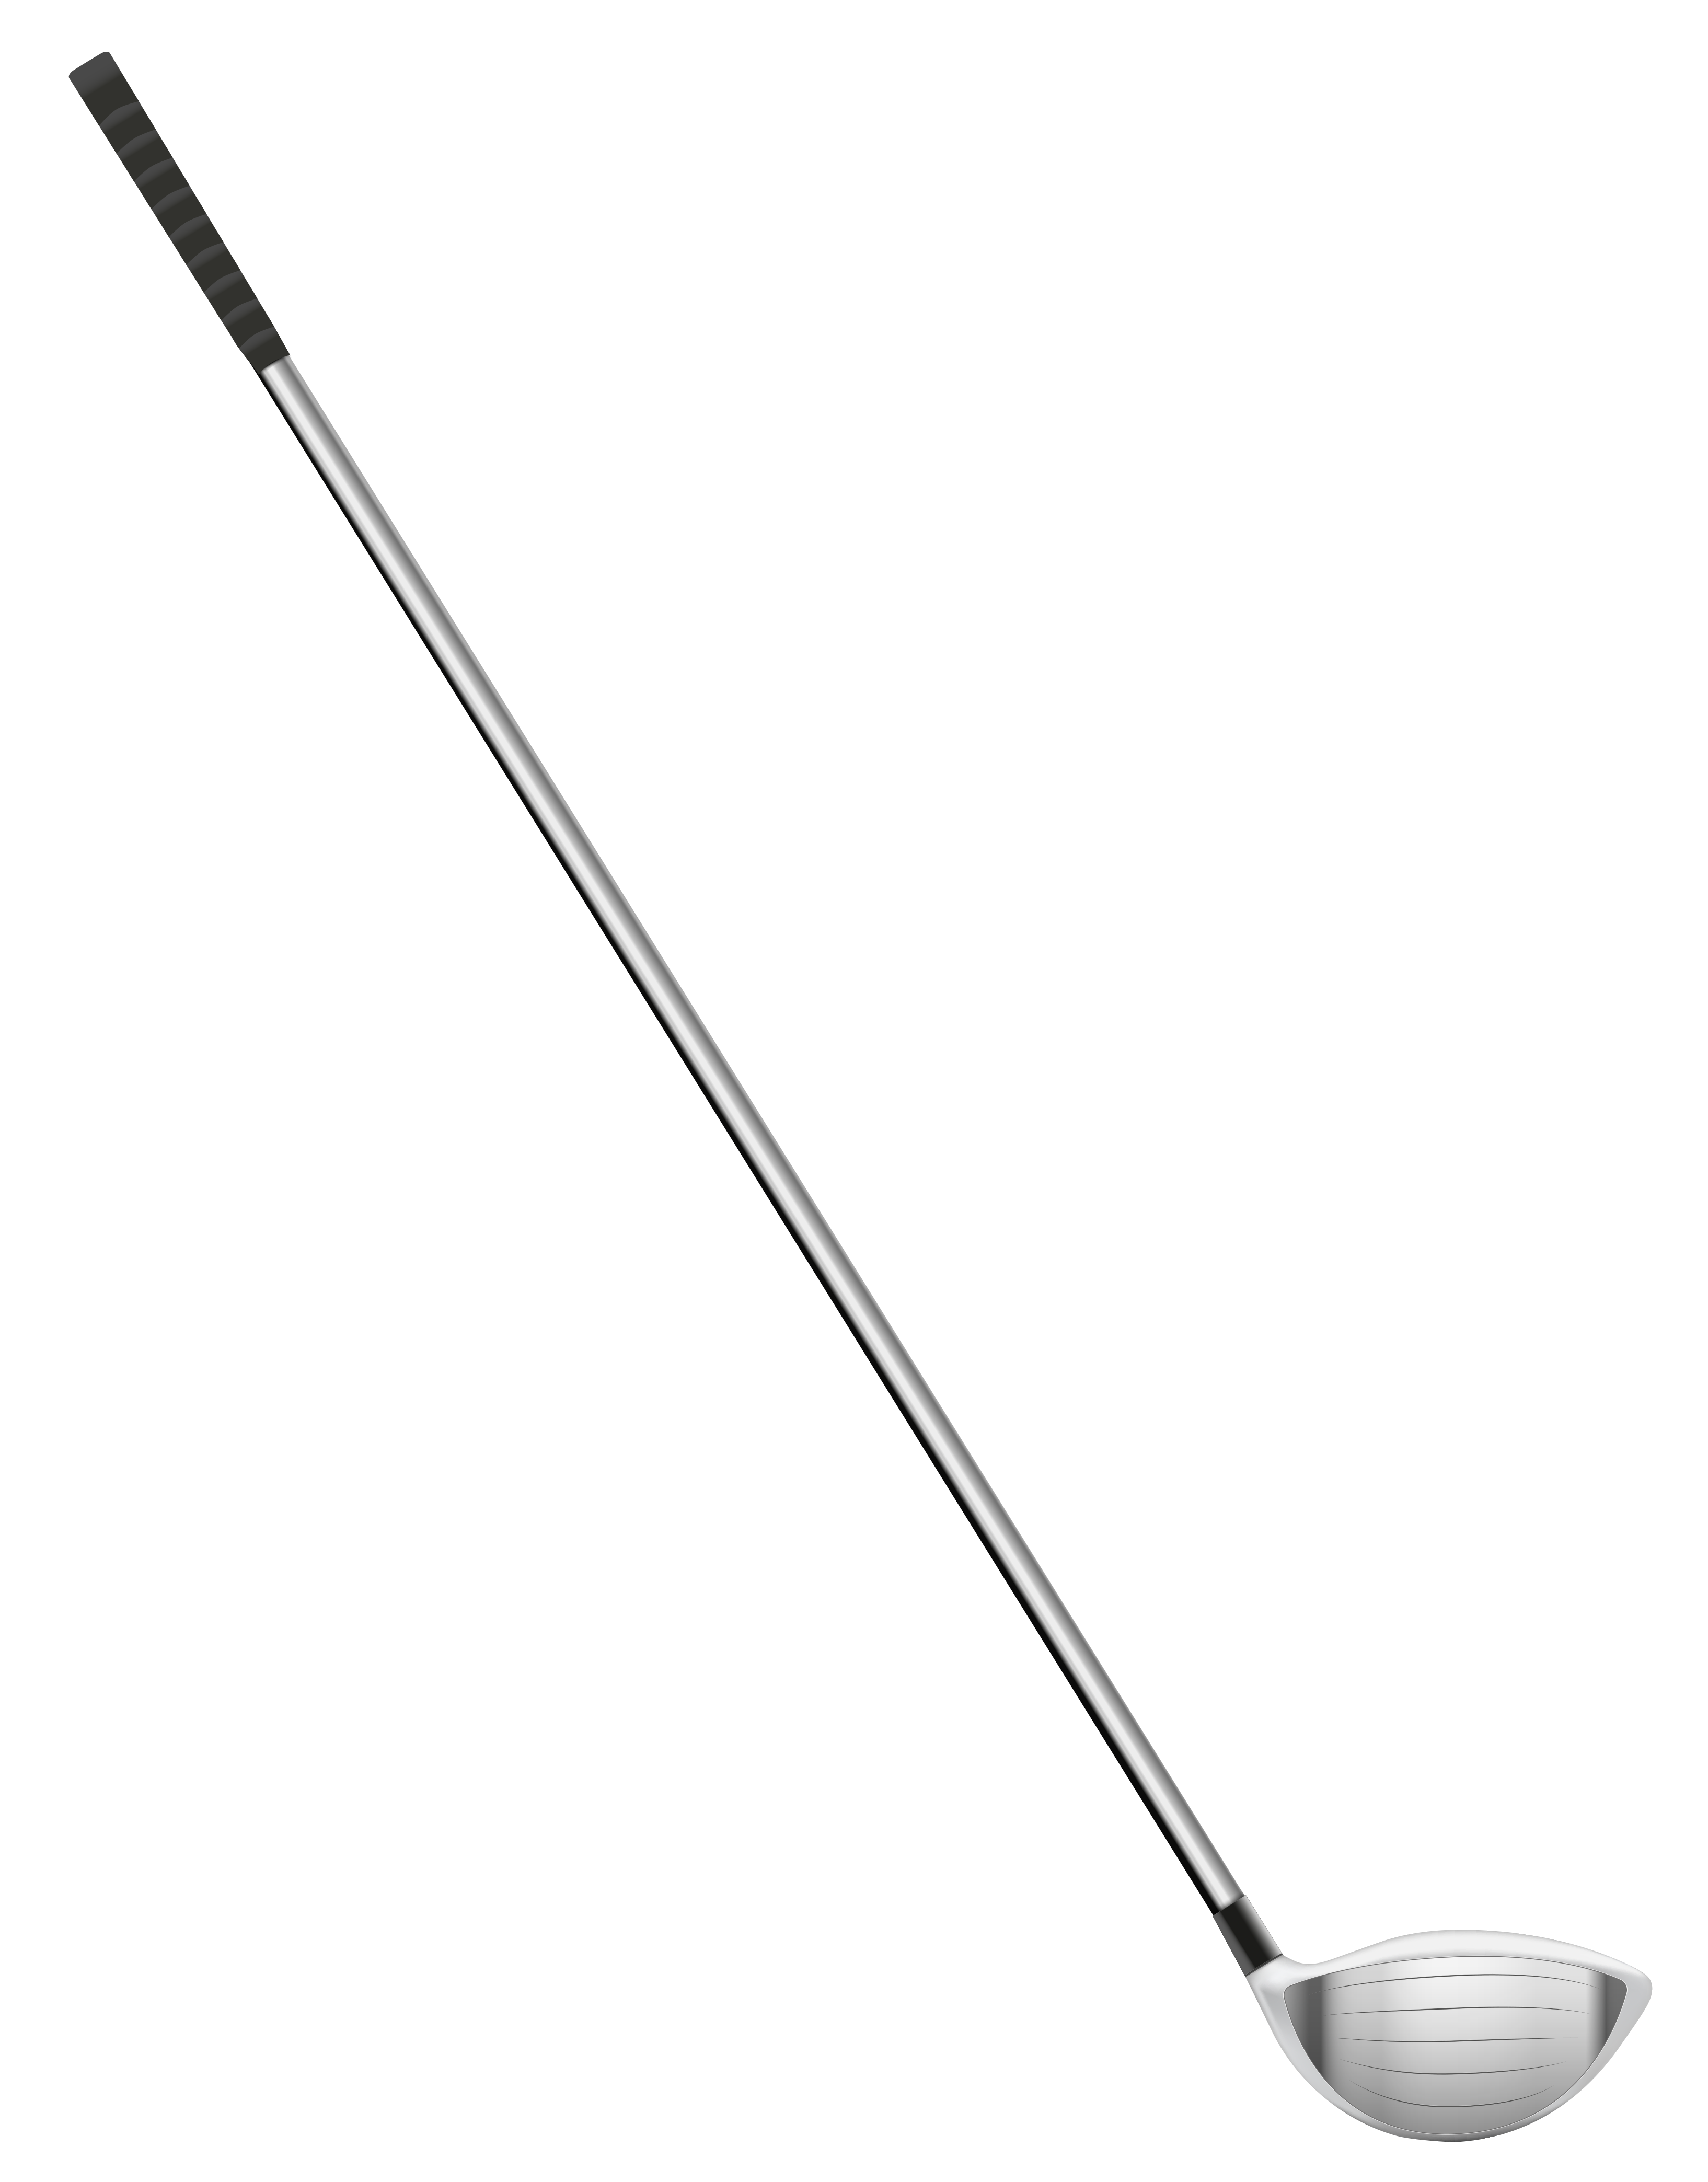 Golf Club Stick Picture Famclipart Png Image Clipart